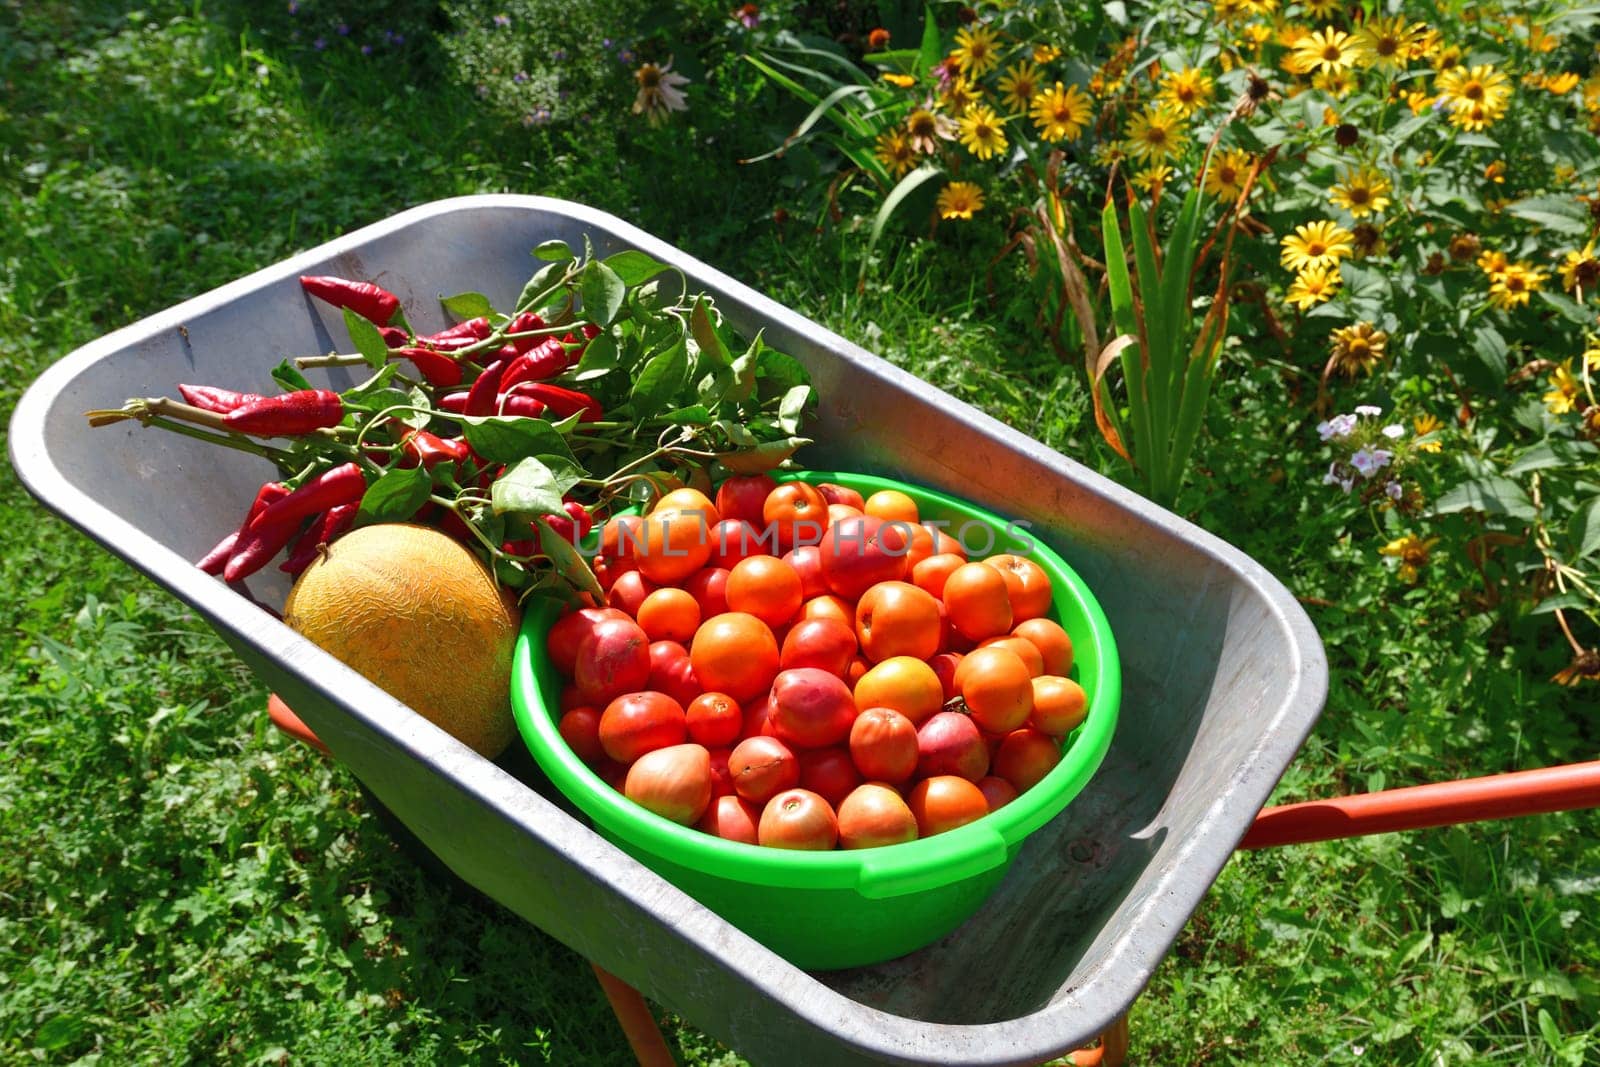 Wheelbarrow with tomatoes, peppers and melon grown in garden